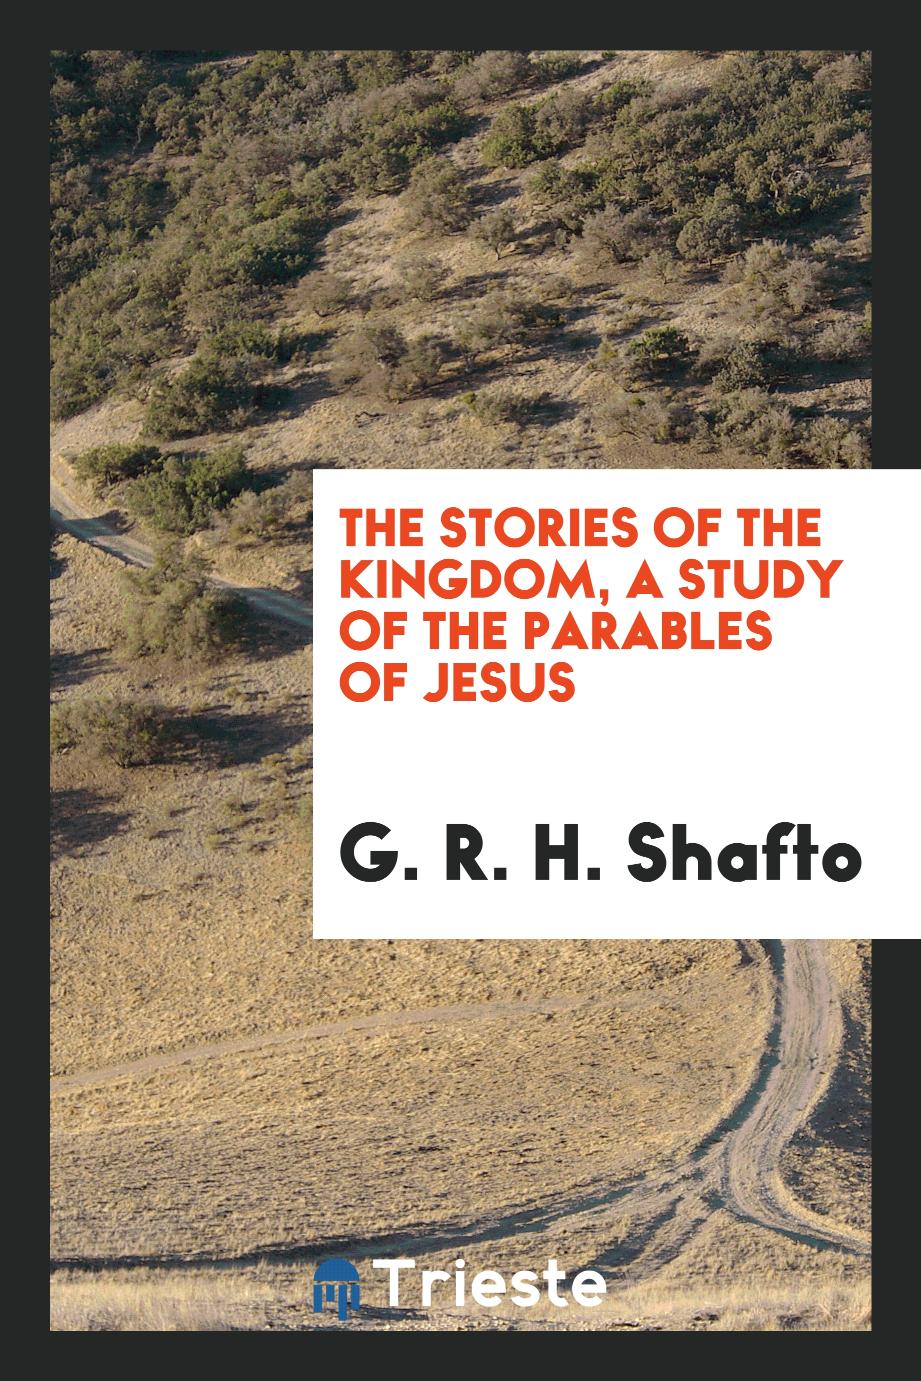 The stories of the Kingdom, a study of the parables of Jesus